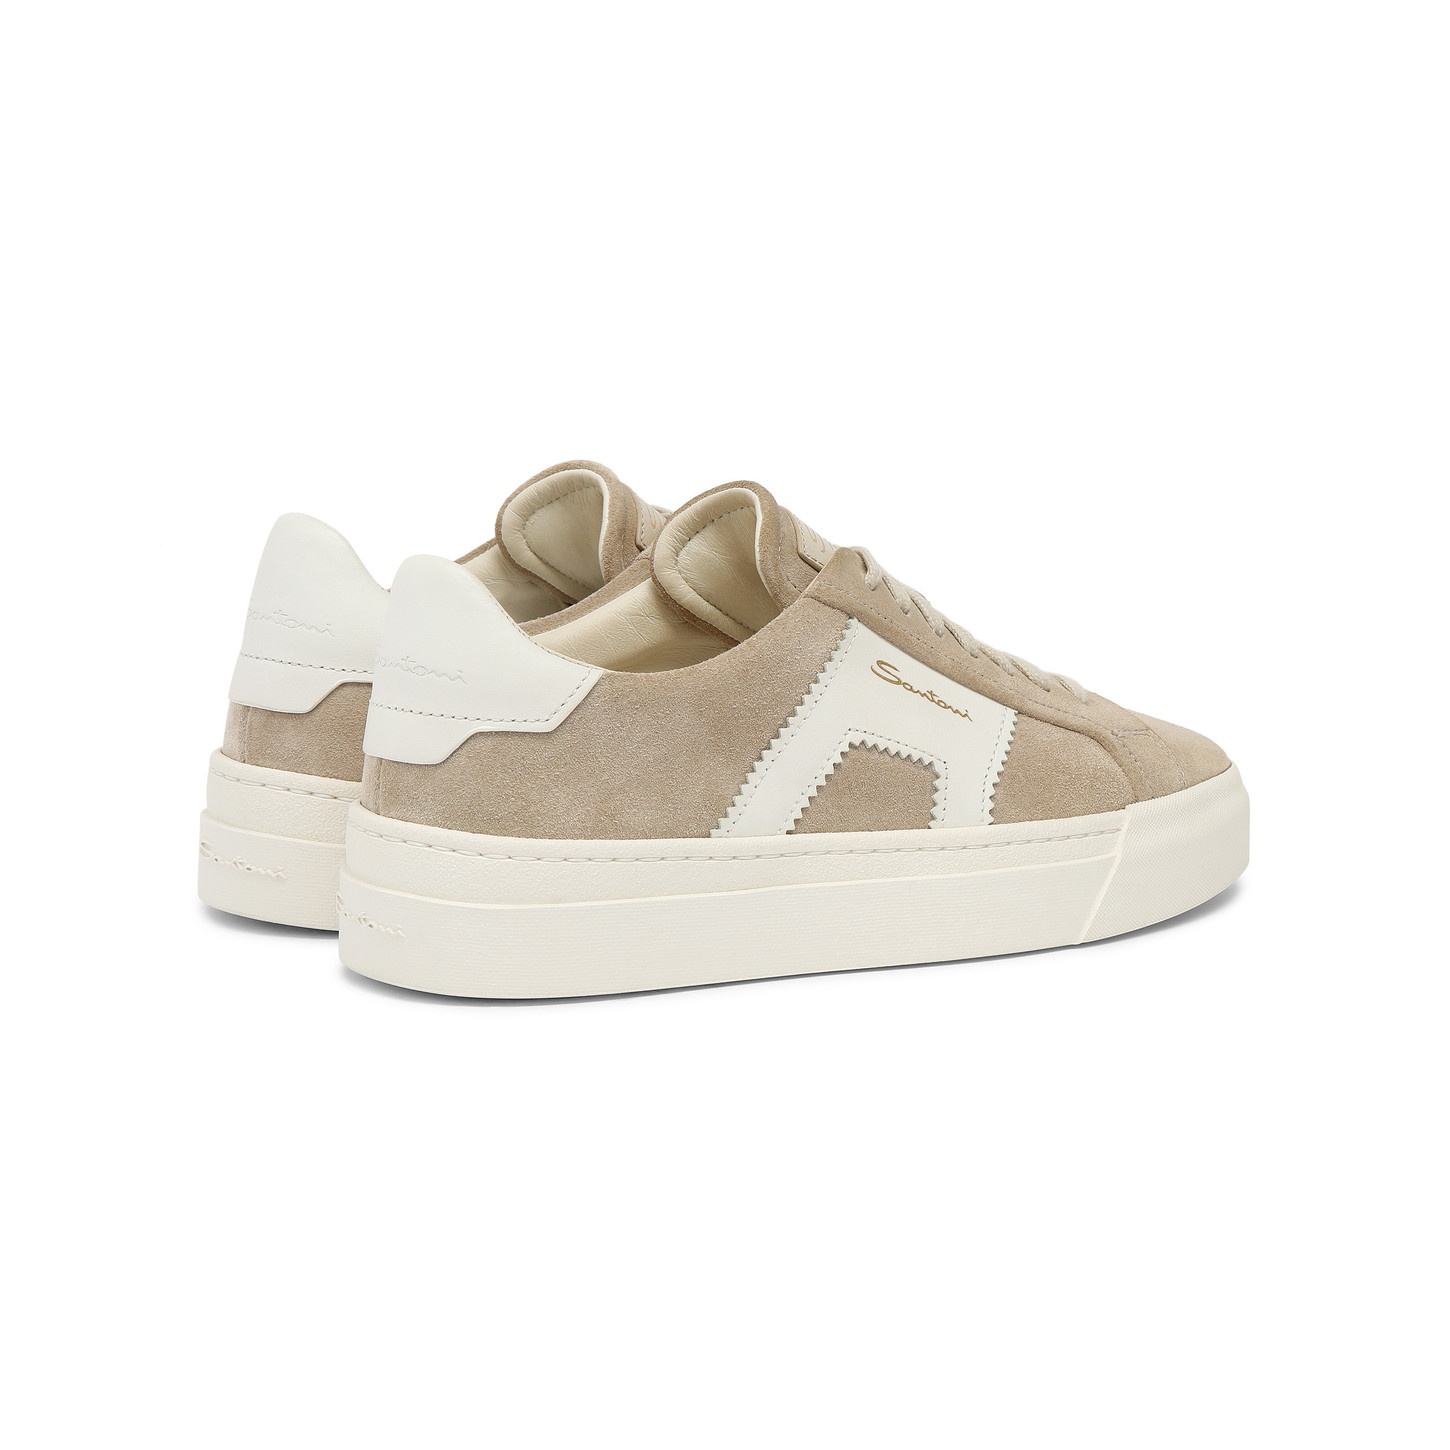 Women’s beige and white suede and leather double buckle sneaker - 4